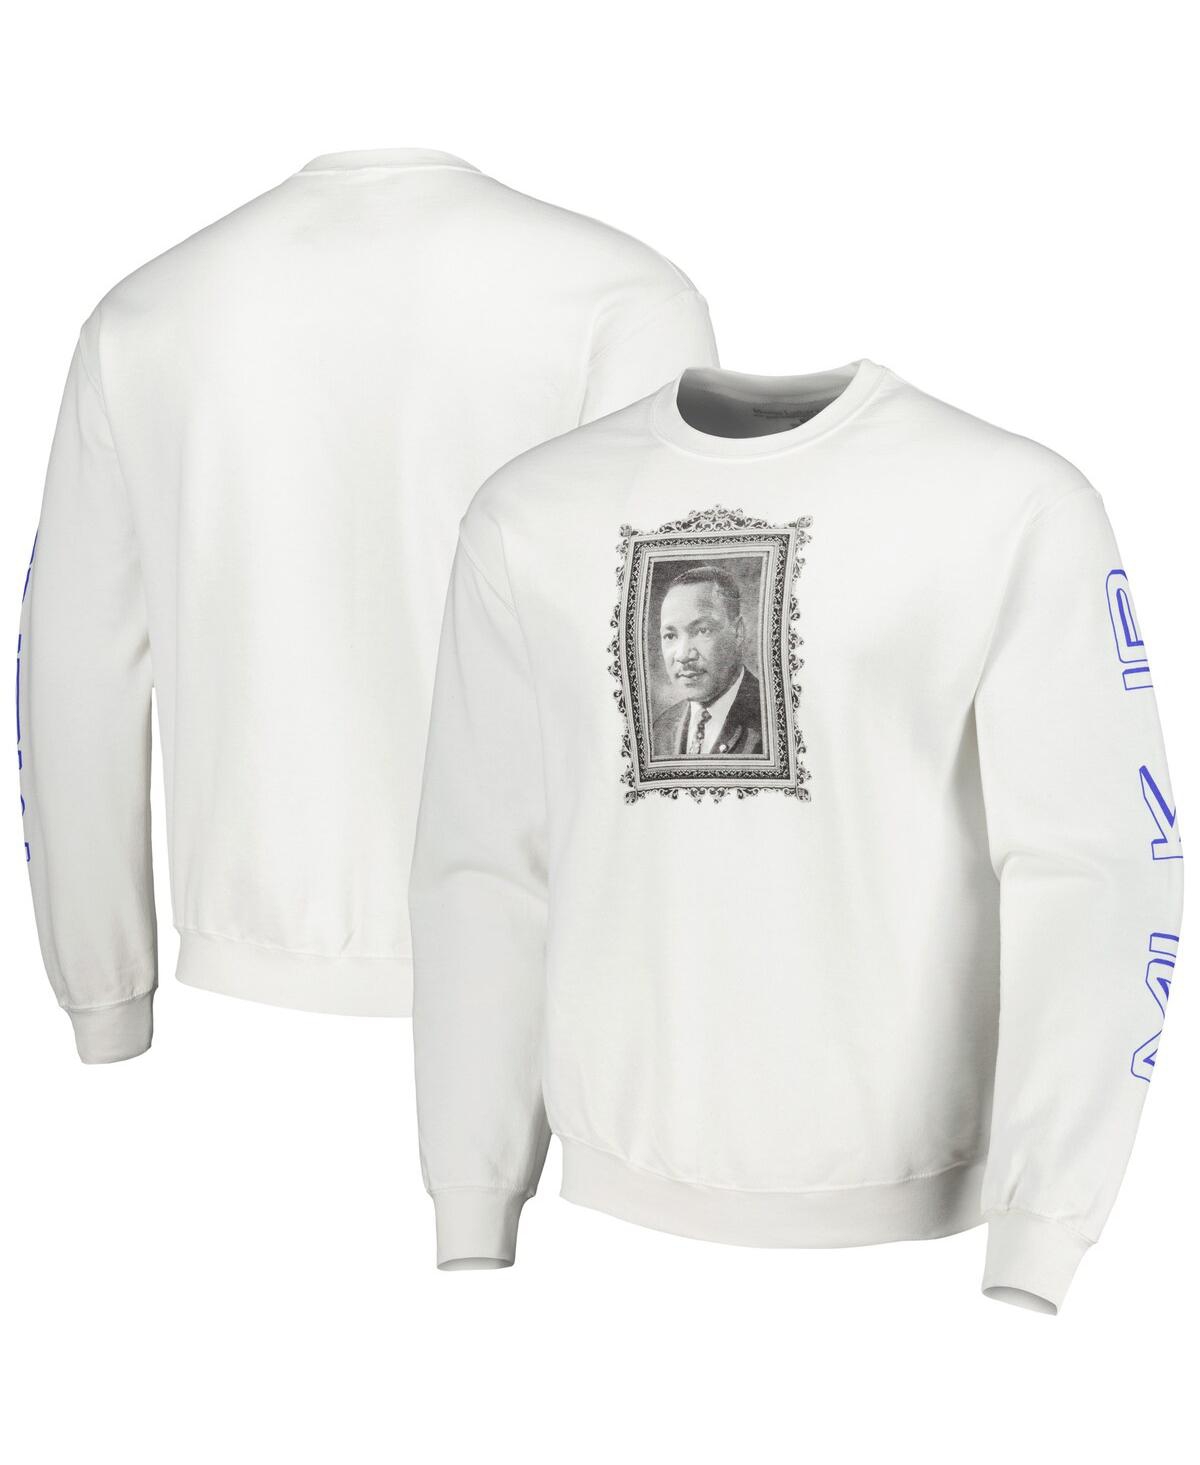 Men's and Women's Martin Luther King Jr. White Graphic Pullover Sweatshirt - White